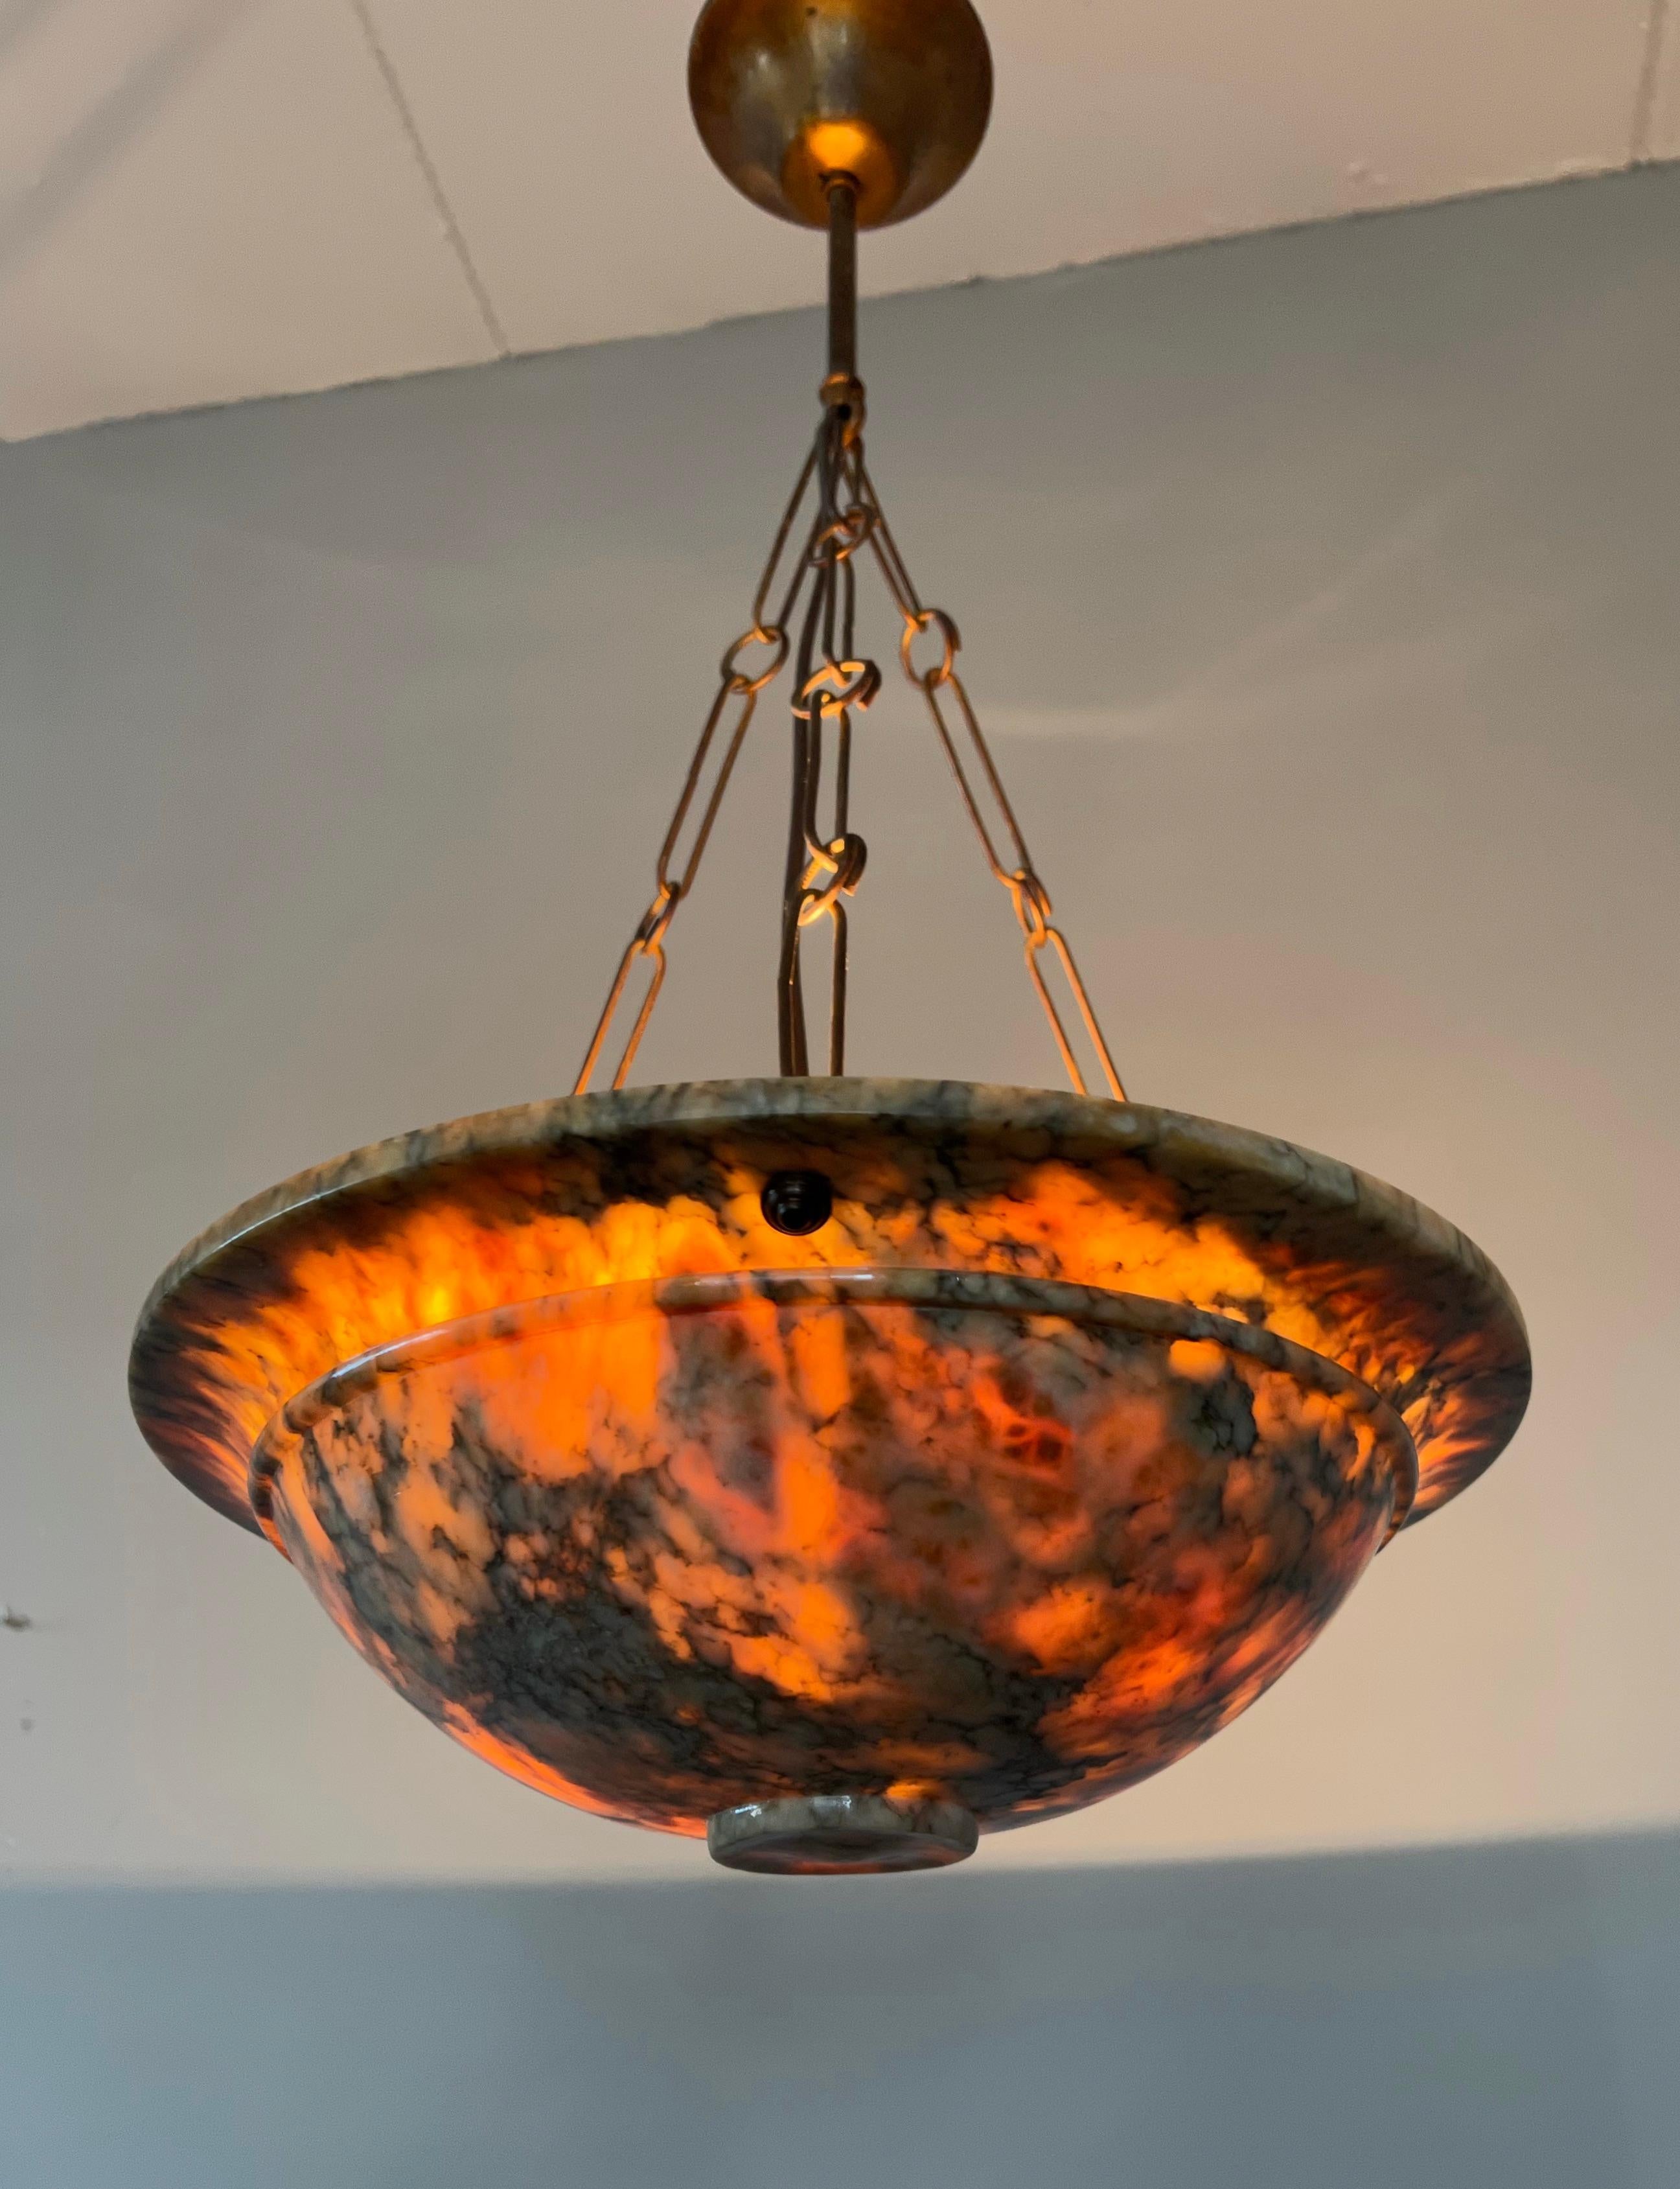 Striking Example Art Deco Alabaster Pendant Light with a Lot of Black Veins 1920 For Sale 2